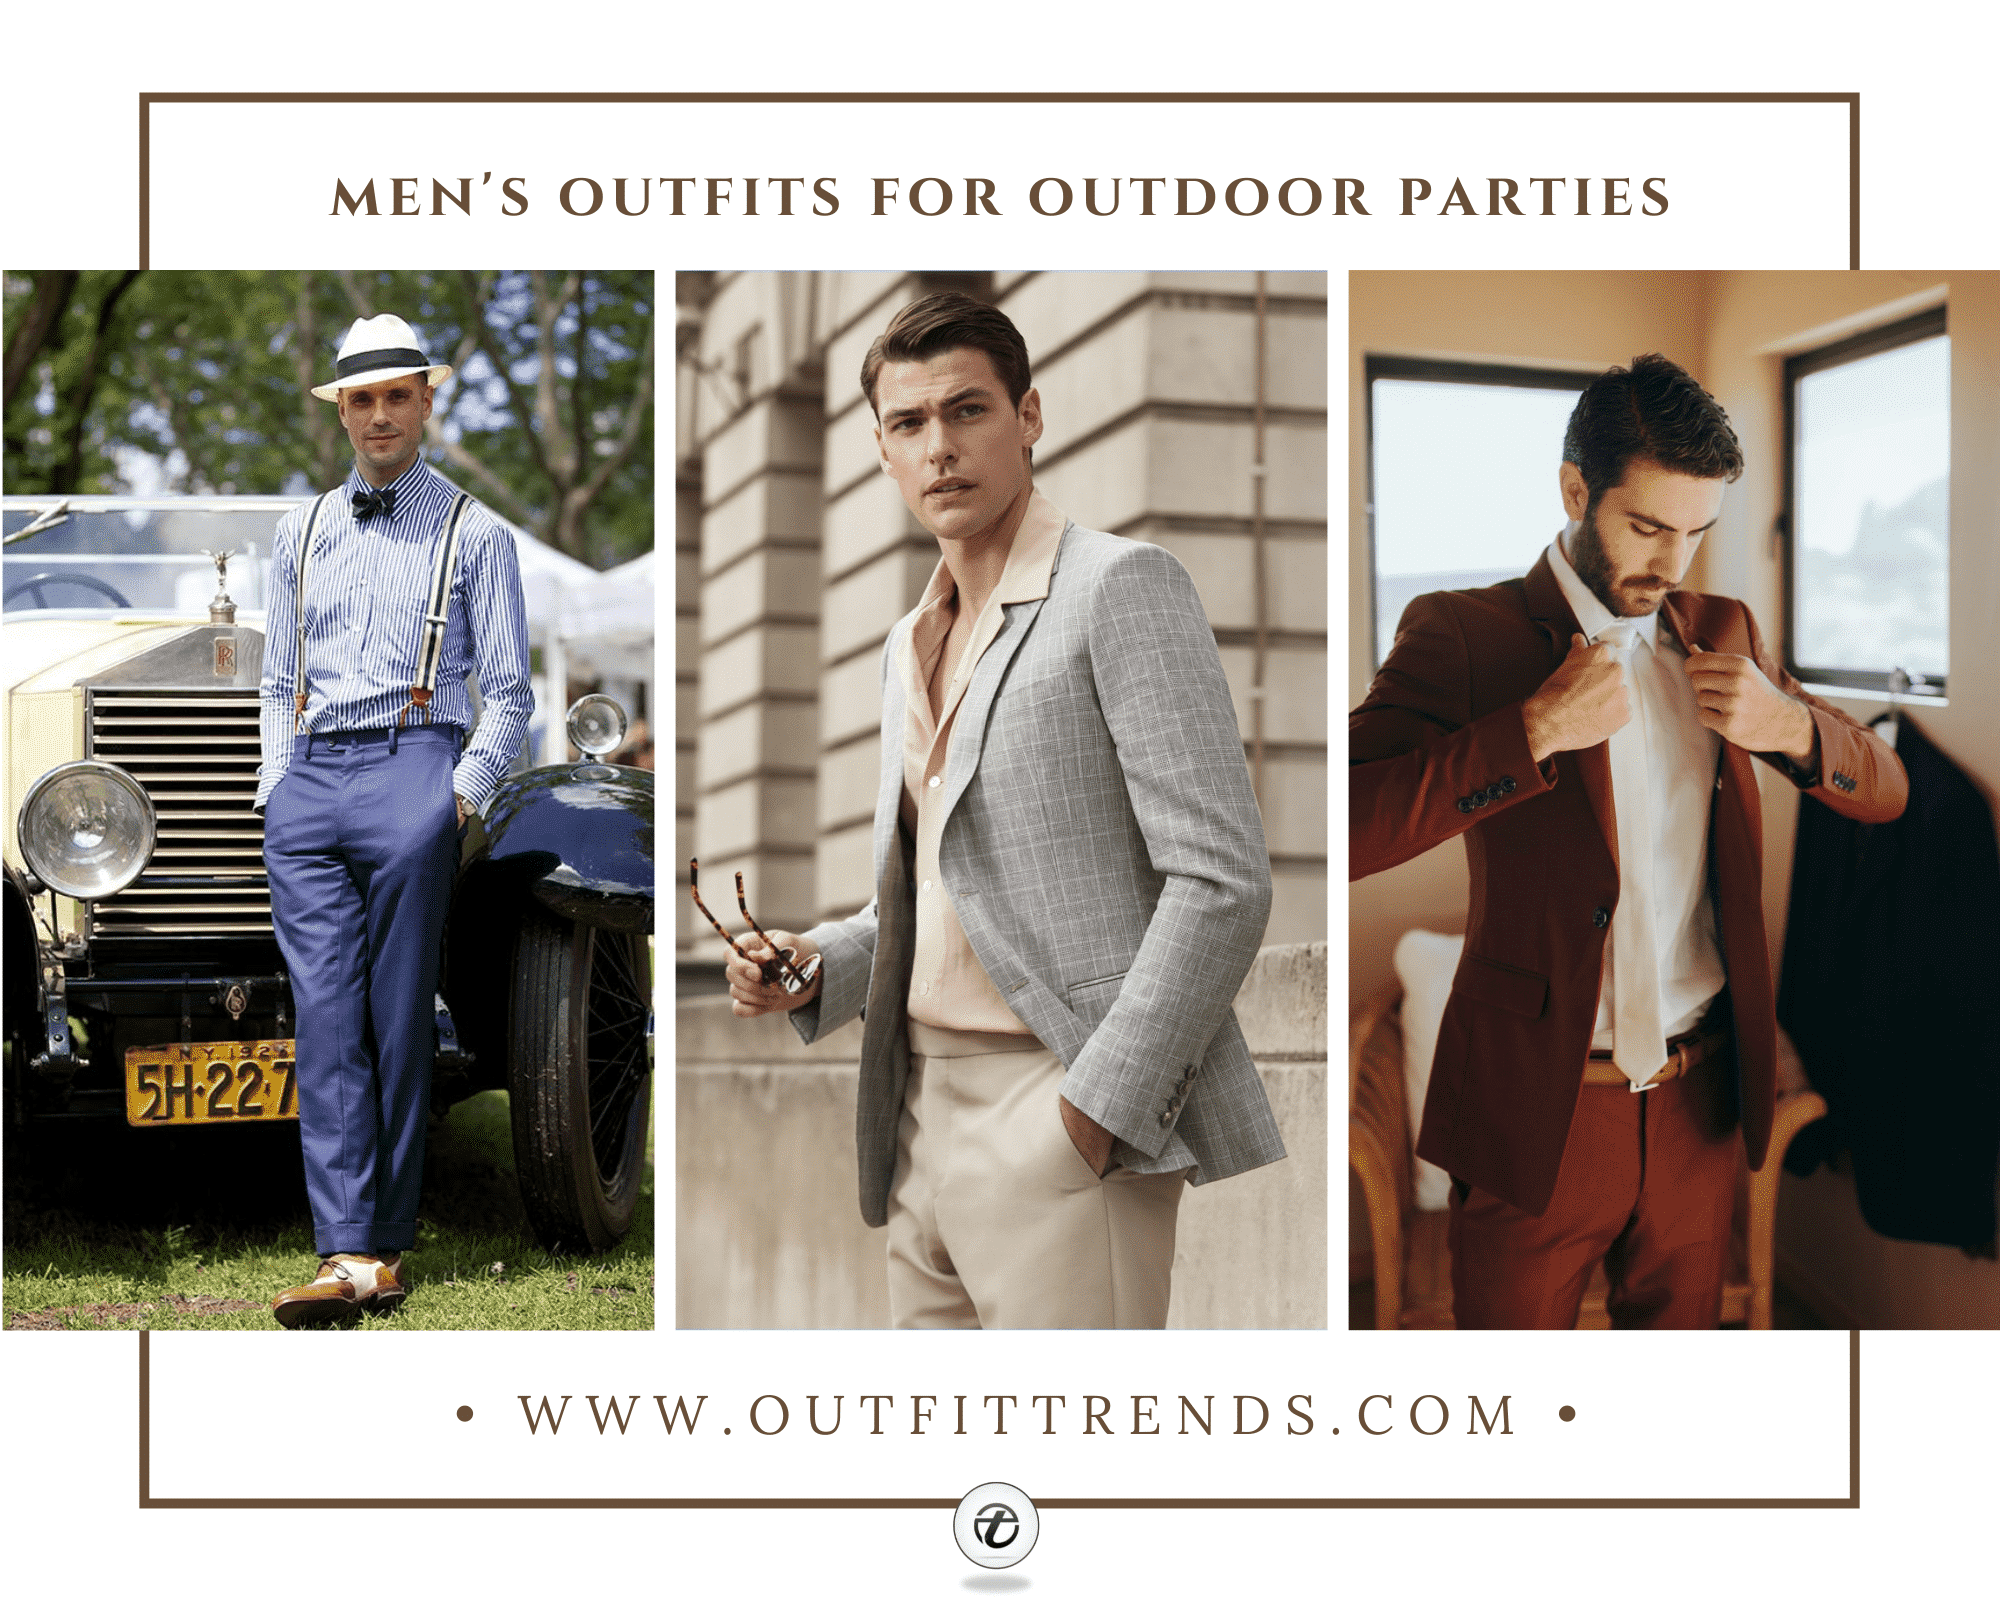 What to wear to a garden party for guys | Dresses Images 2022